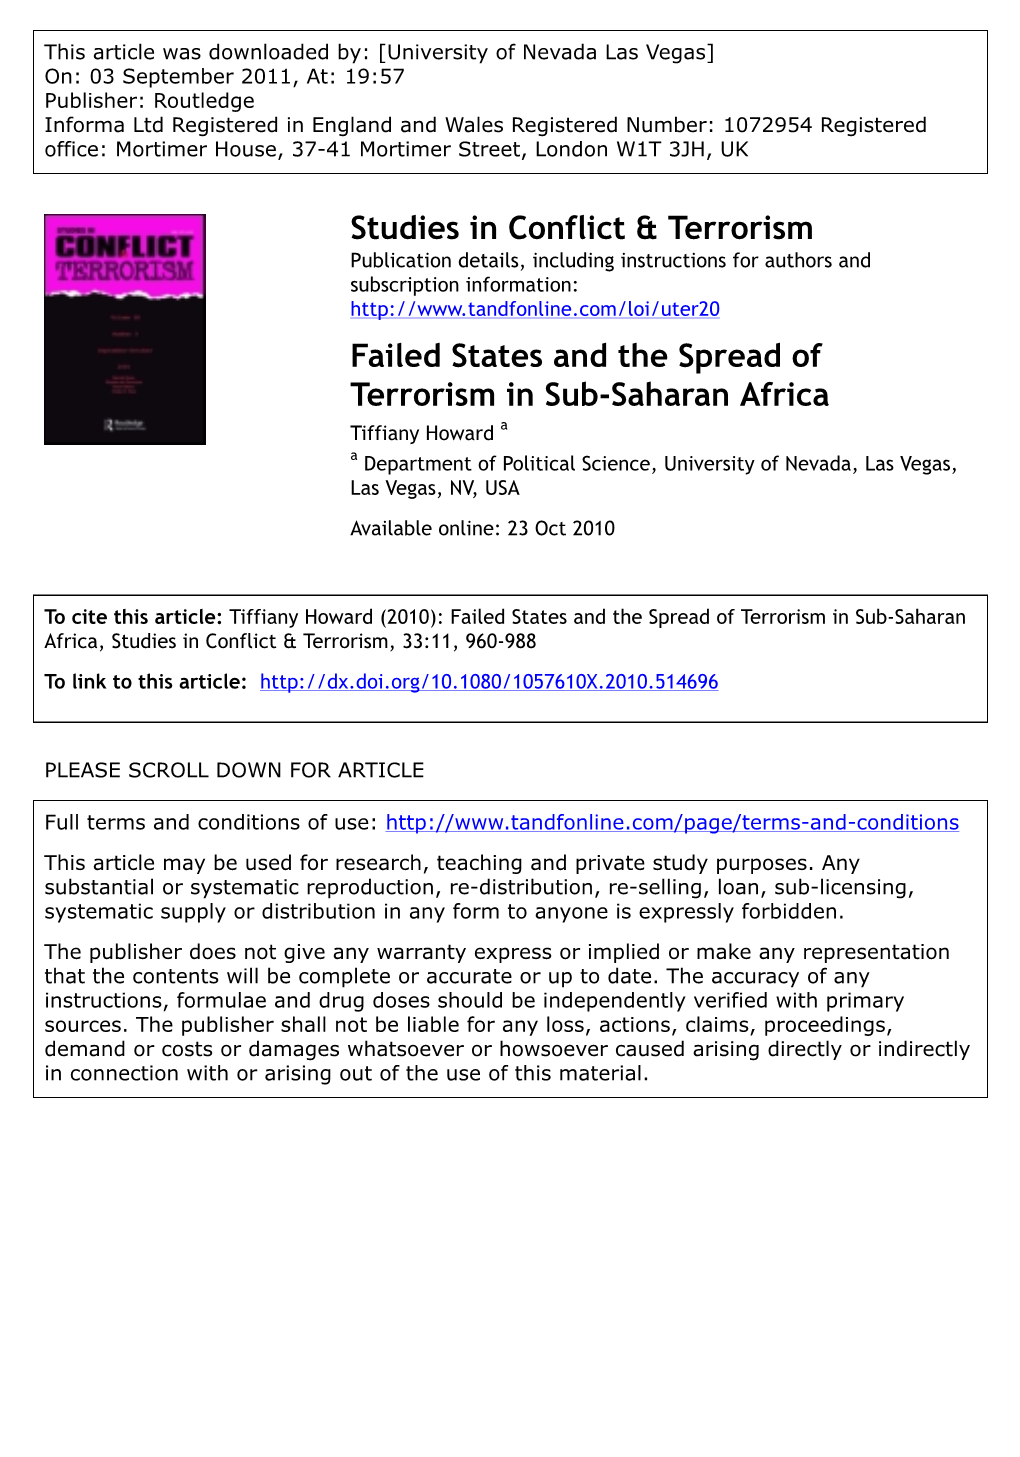 Failed States and the Spread of Terrorism in Sub-Saharan Africa